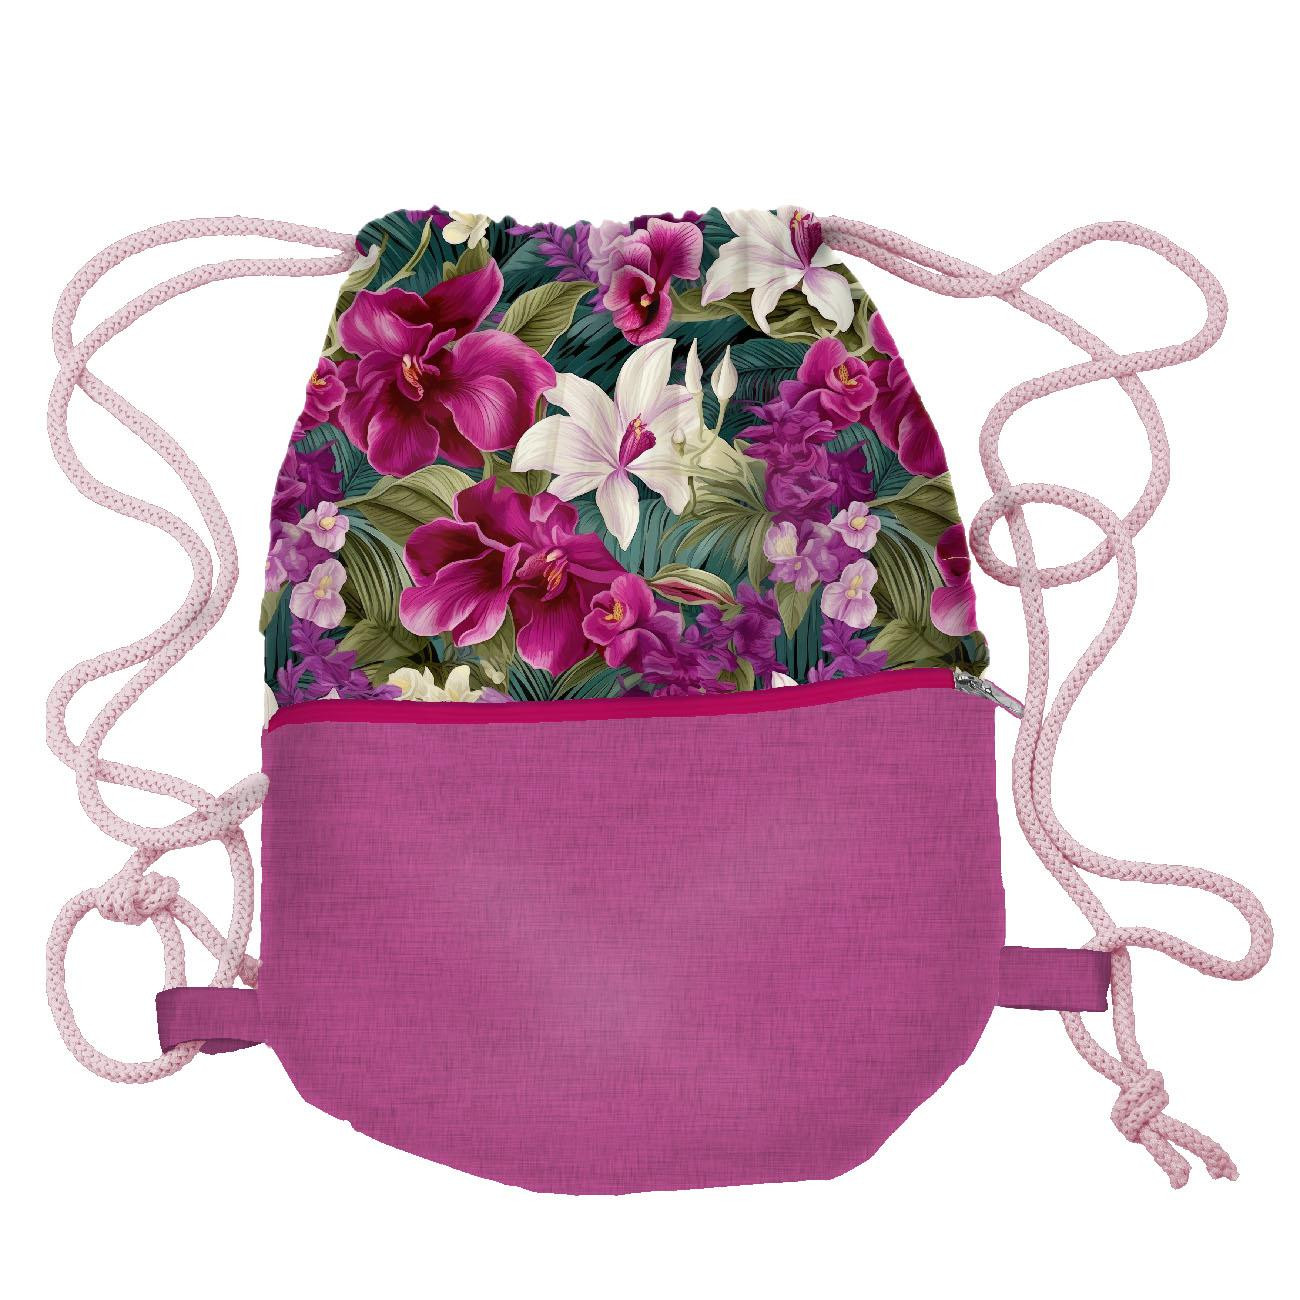 GYM BAG WITH POCKET - EXOTIC ORCHIDS PAT. 6 - sewing set